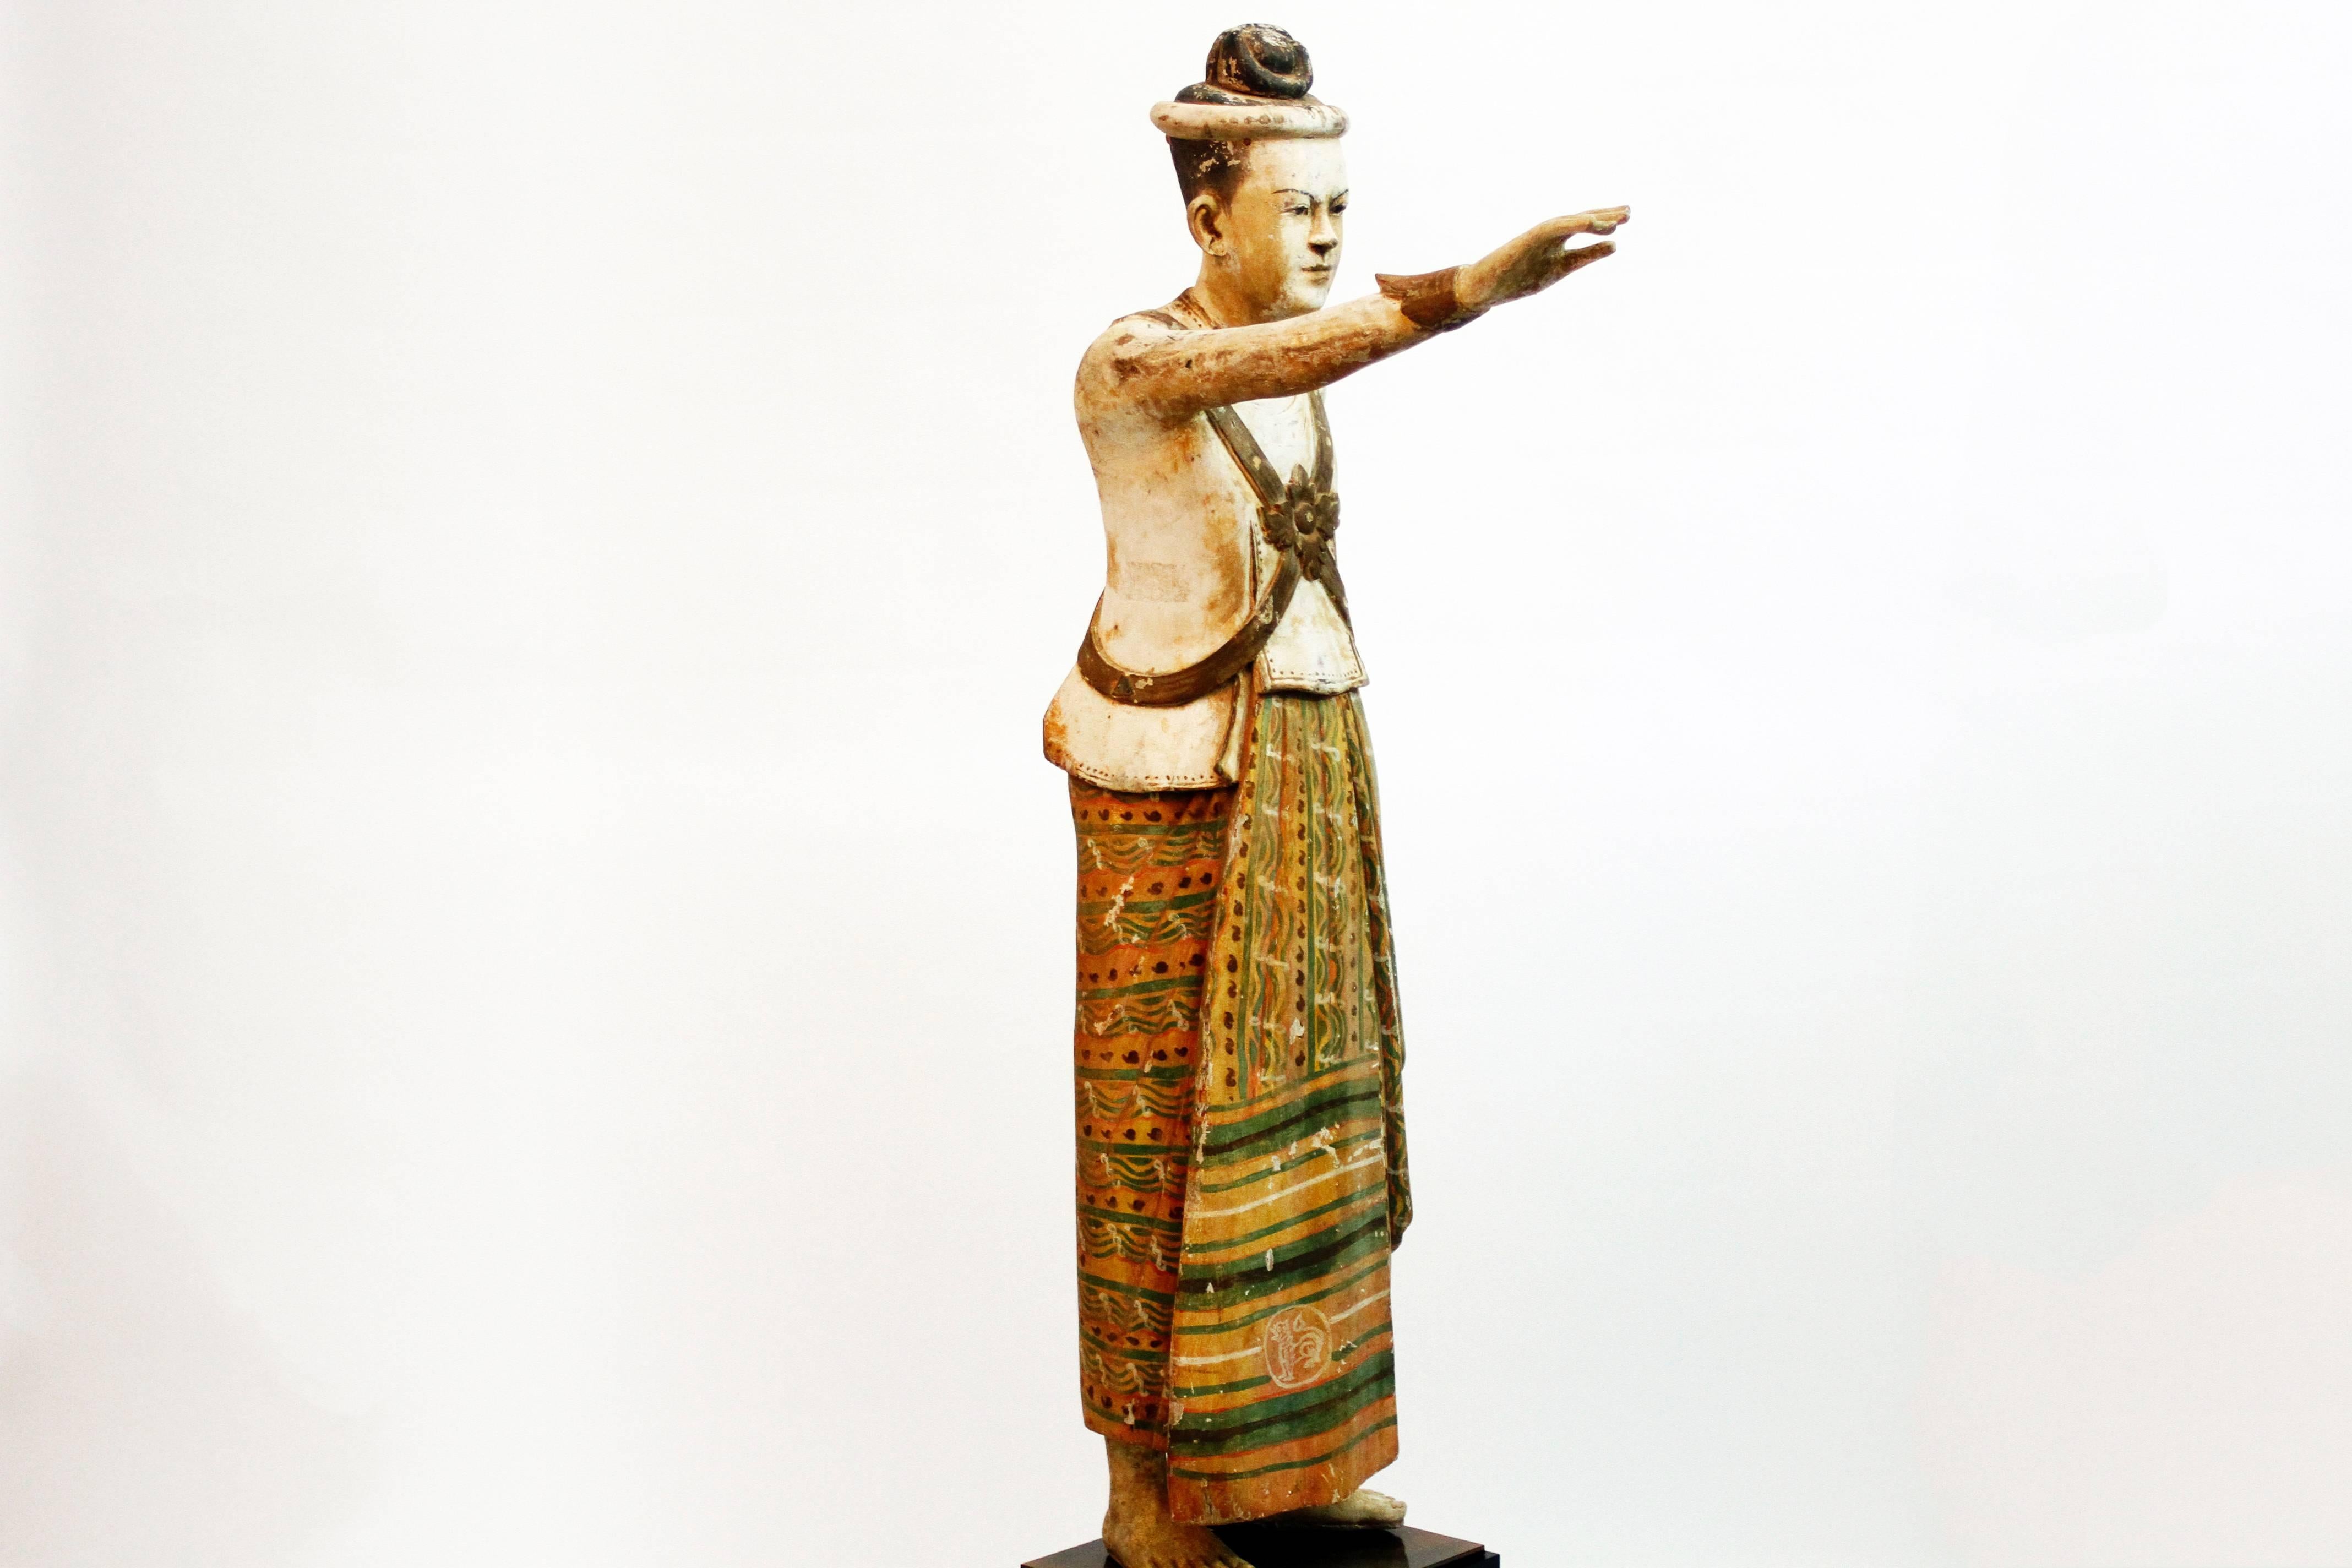 This monumental hand-carved statue is of a Burmese King. It is from Rangoon, Myanmar and is made from teakwood, early 19th century.